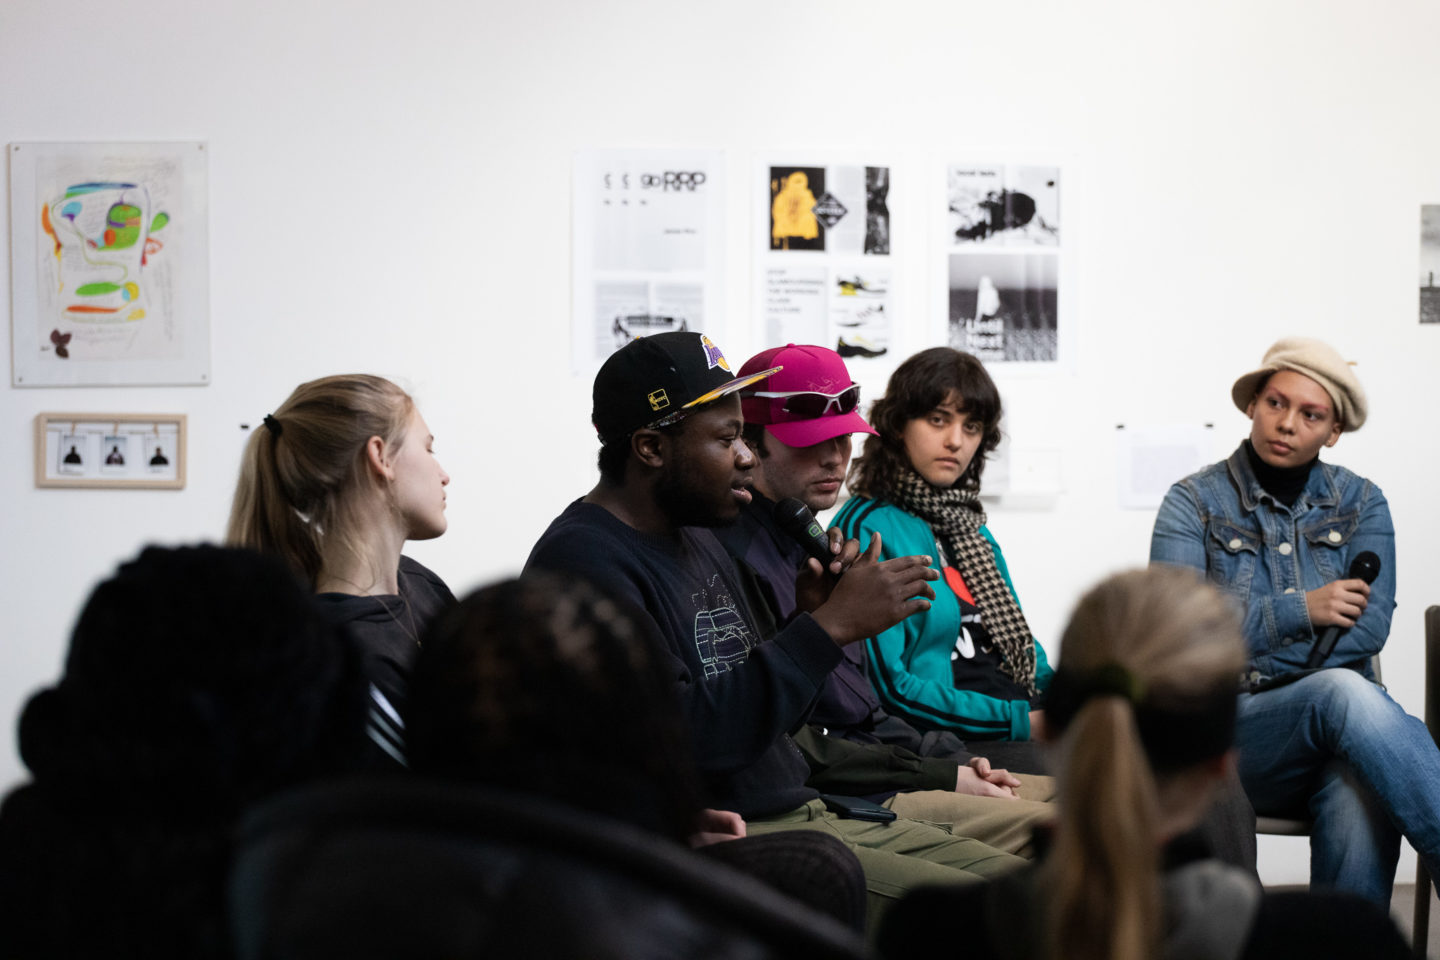 A group of young people speaking on a panel in an art gallery.